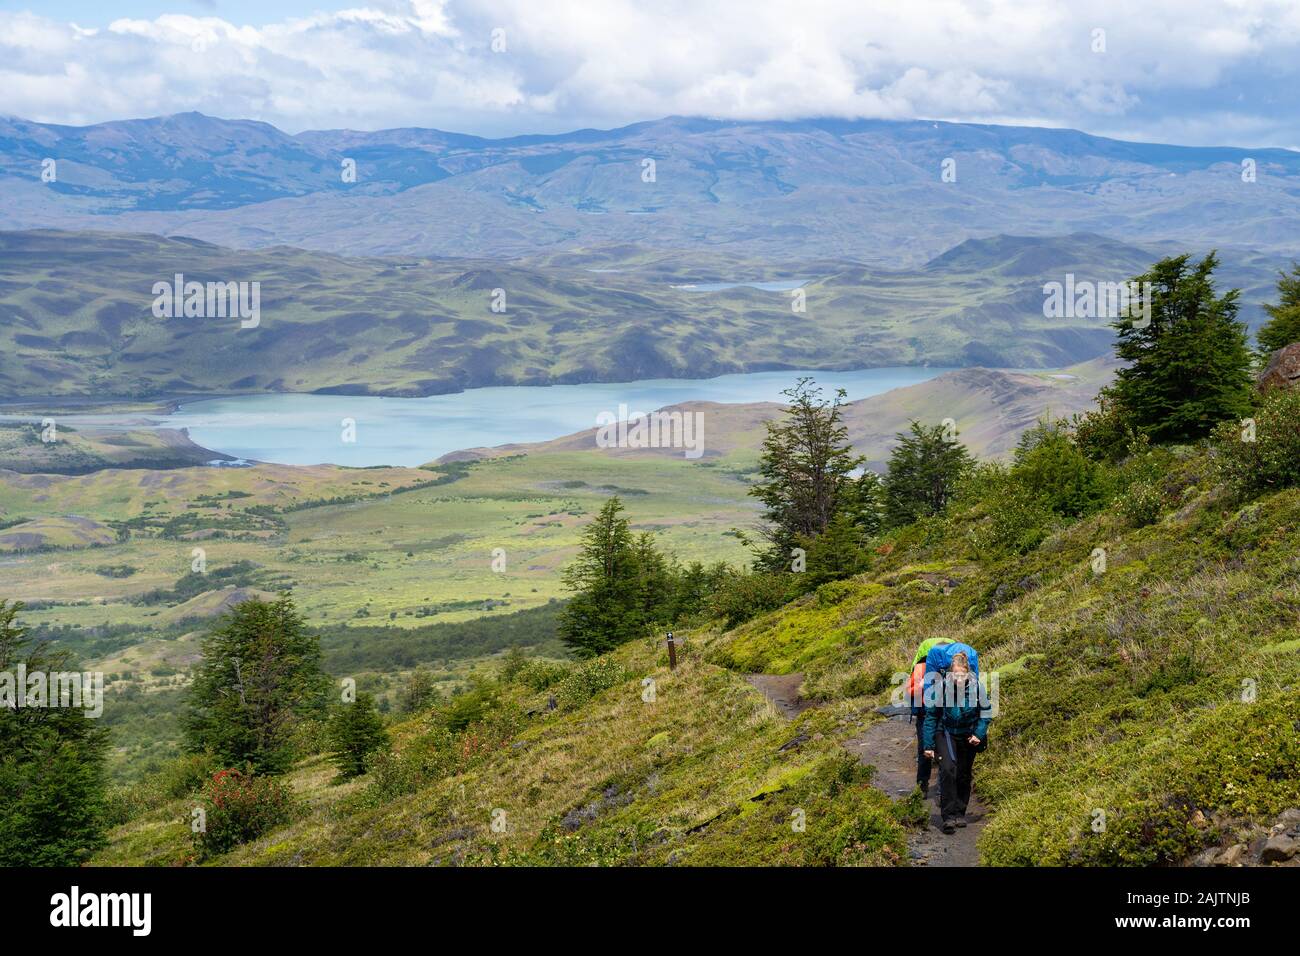 Hikers on the famous W Trek in Torres del Paine National Park in Patagonia, Chile, South America. Stock Photo